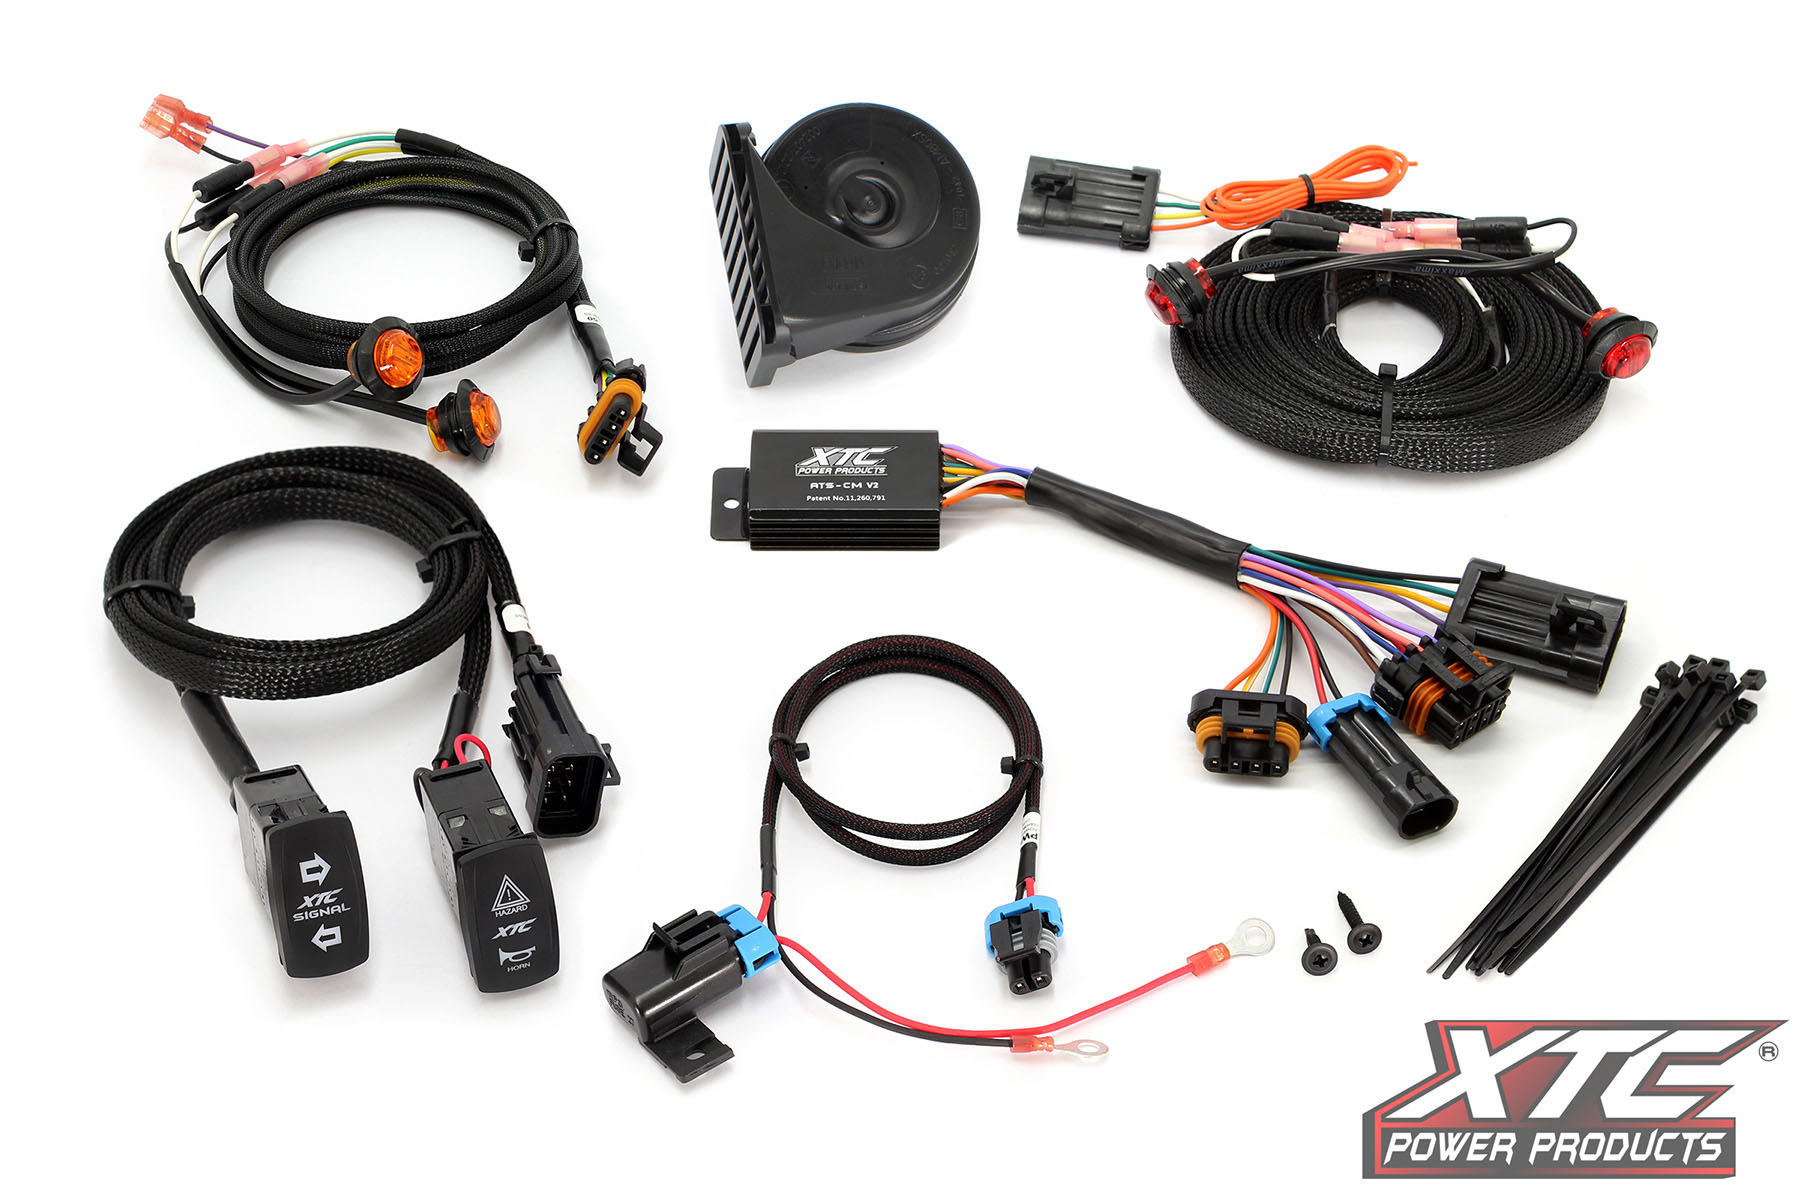 Universal Self-Canceling Turn Signal Kit with Horn - XTC Power